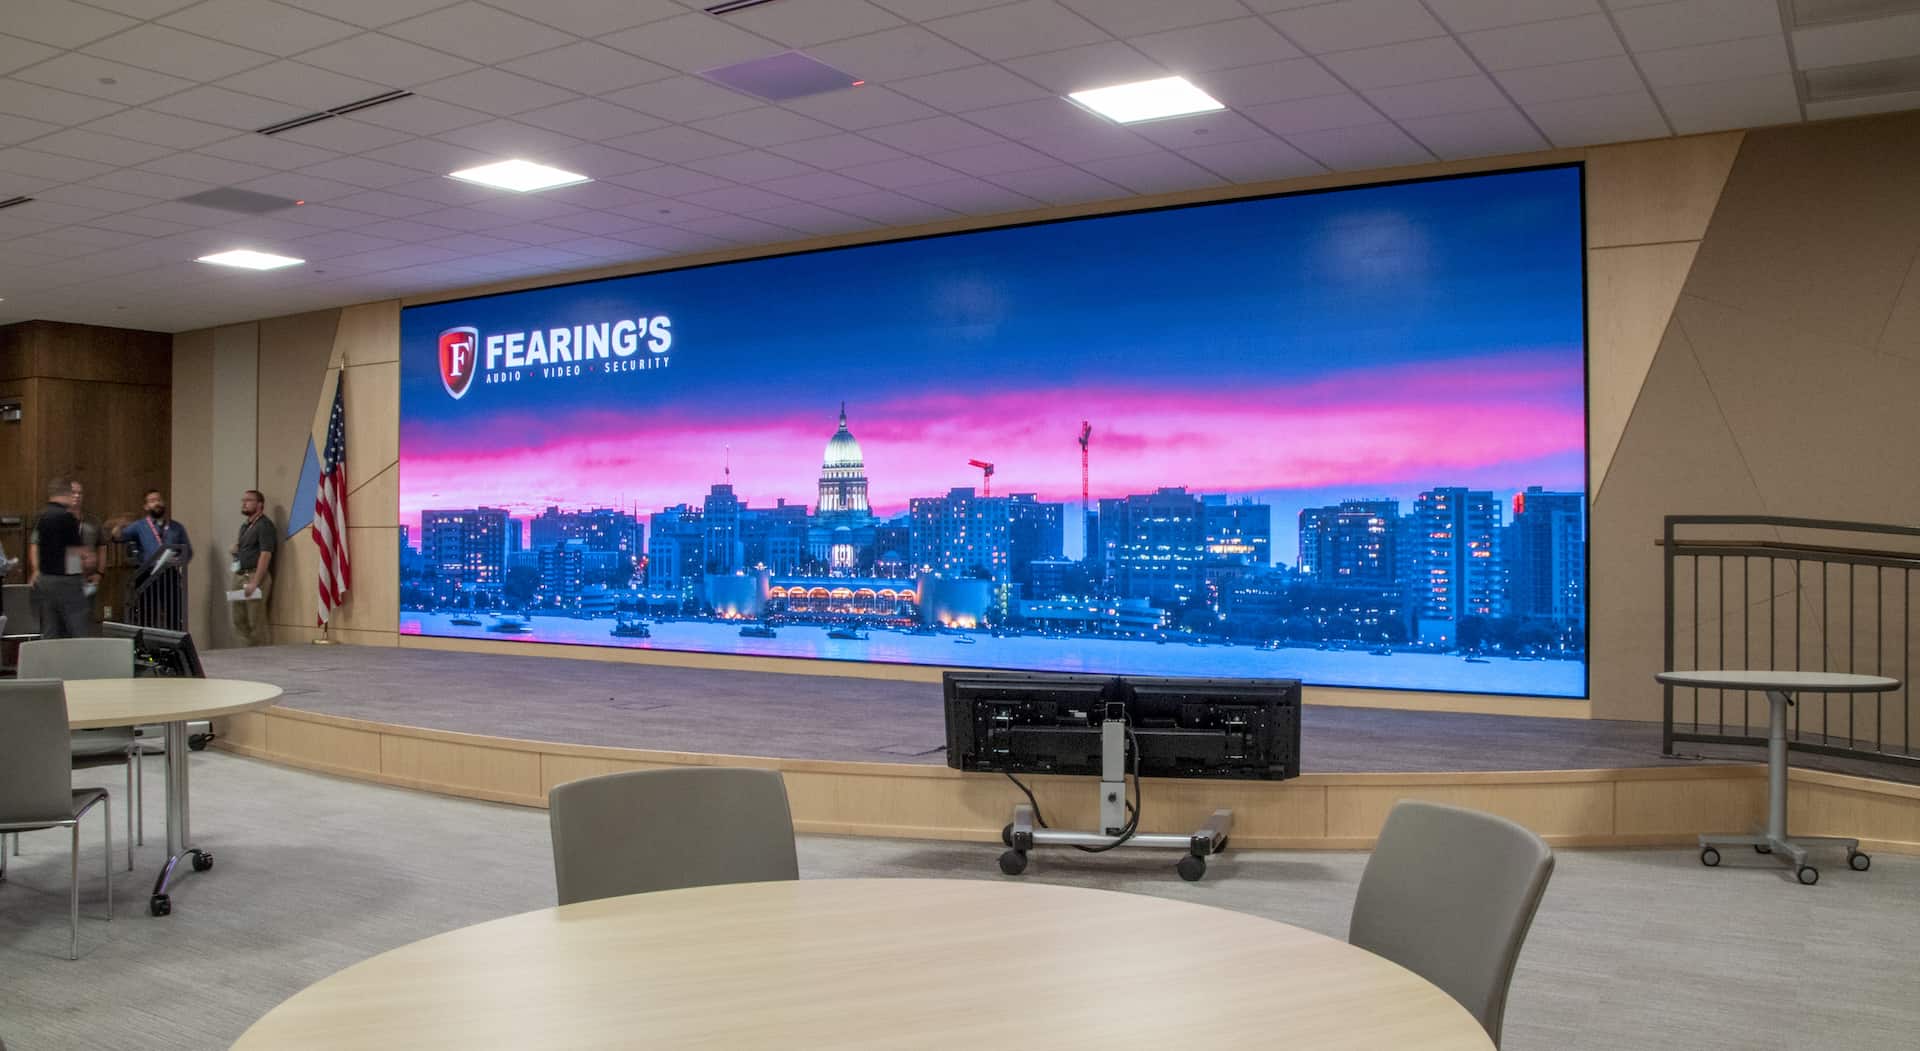 Photo of a LED video wall installed by Fearing's Audio Video Security of Madison and Milwaukee Wisconsin.